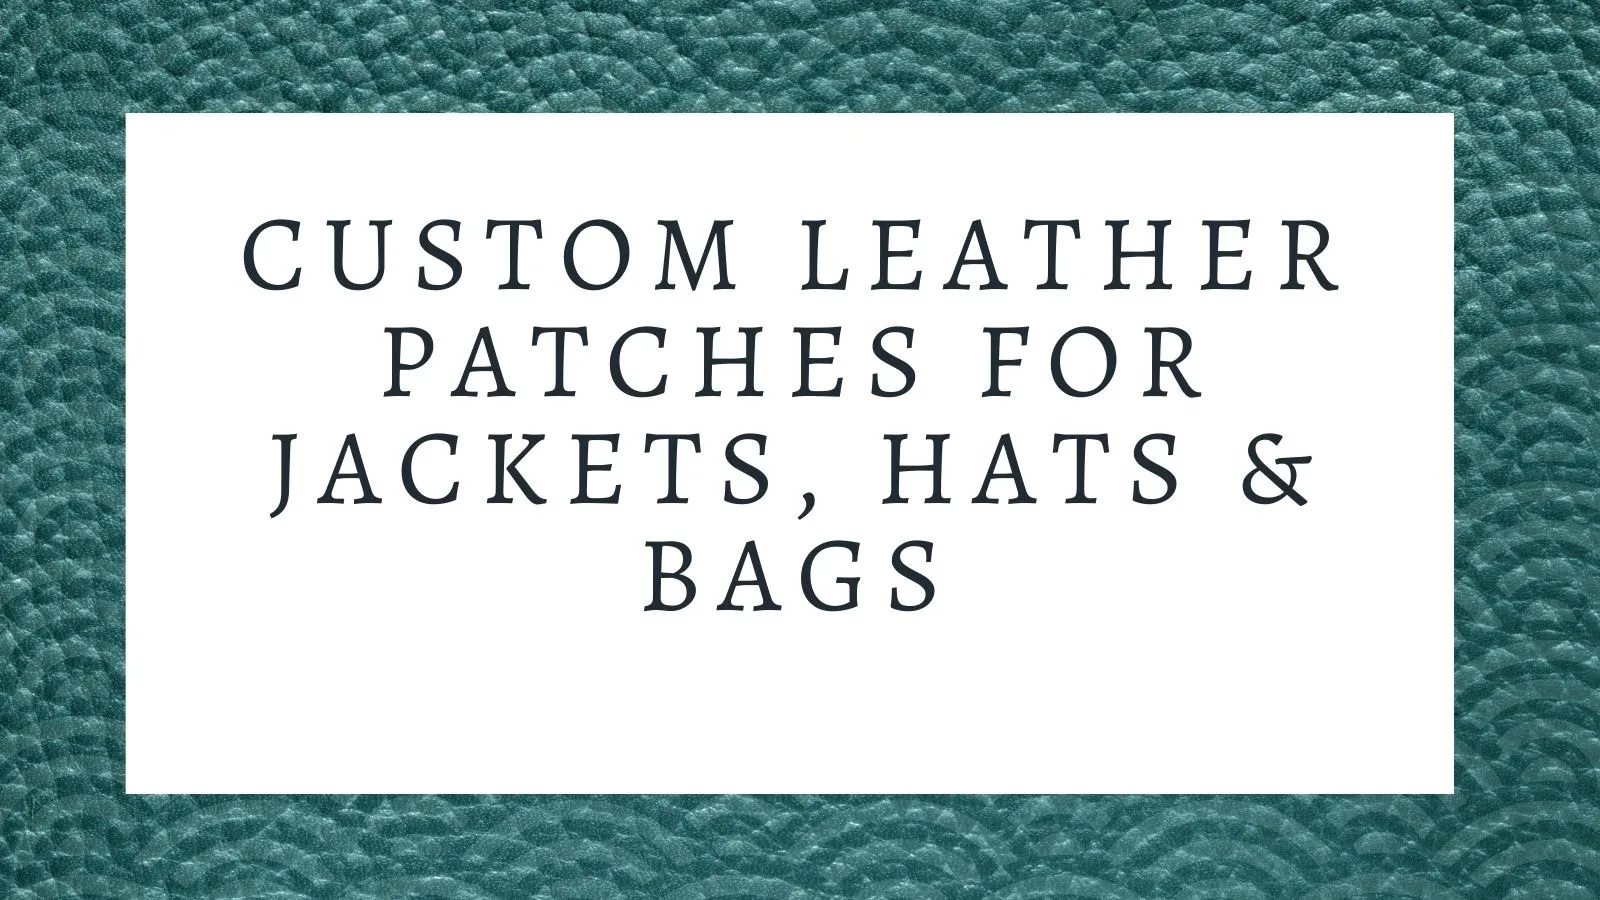 Image for Custom Leather Patches for Jackets, Hats & Bags